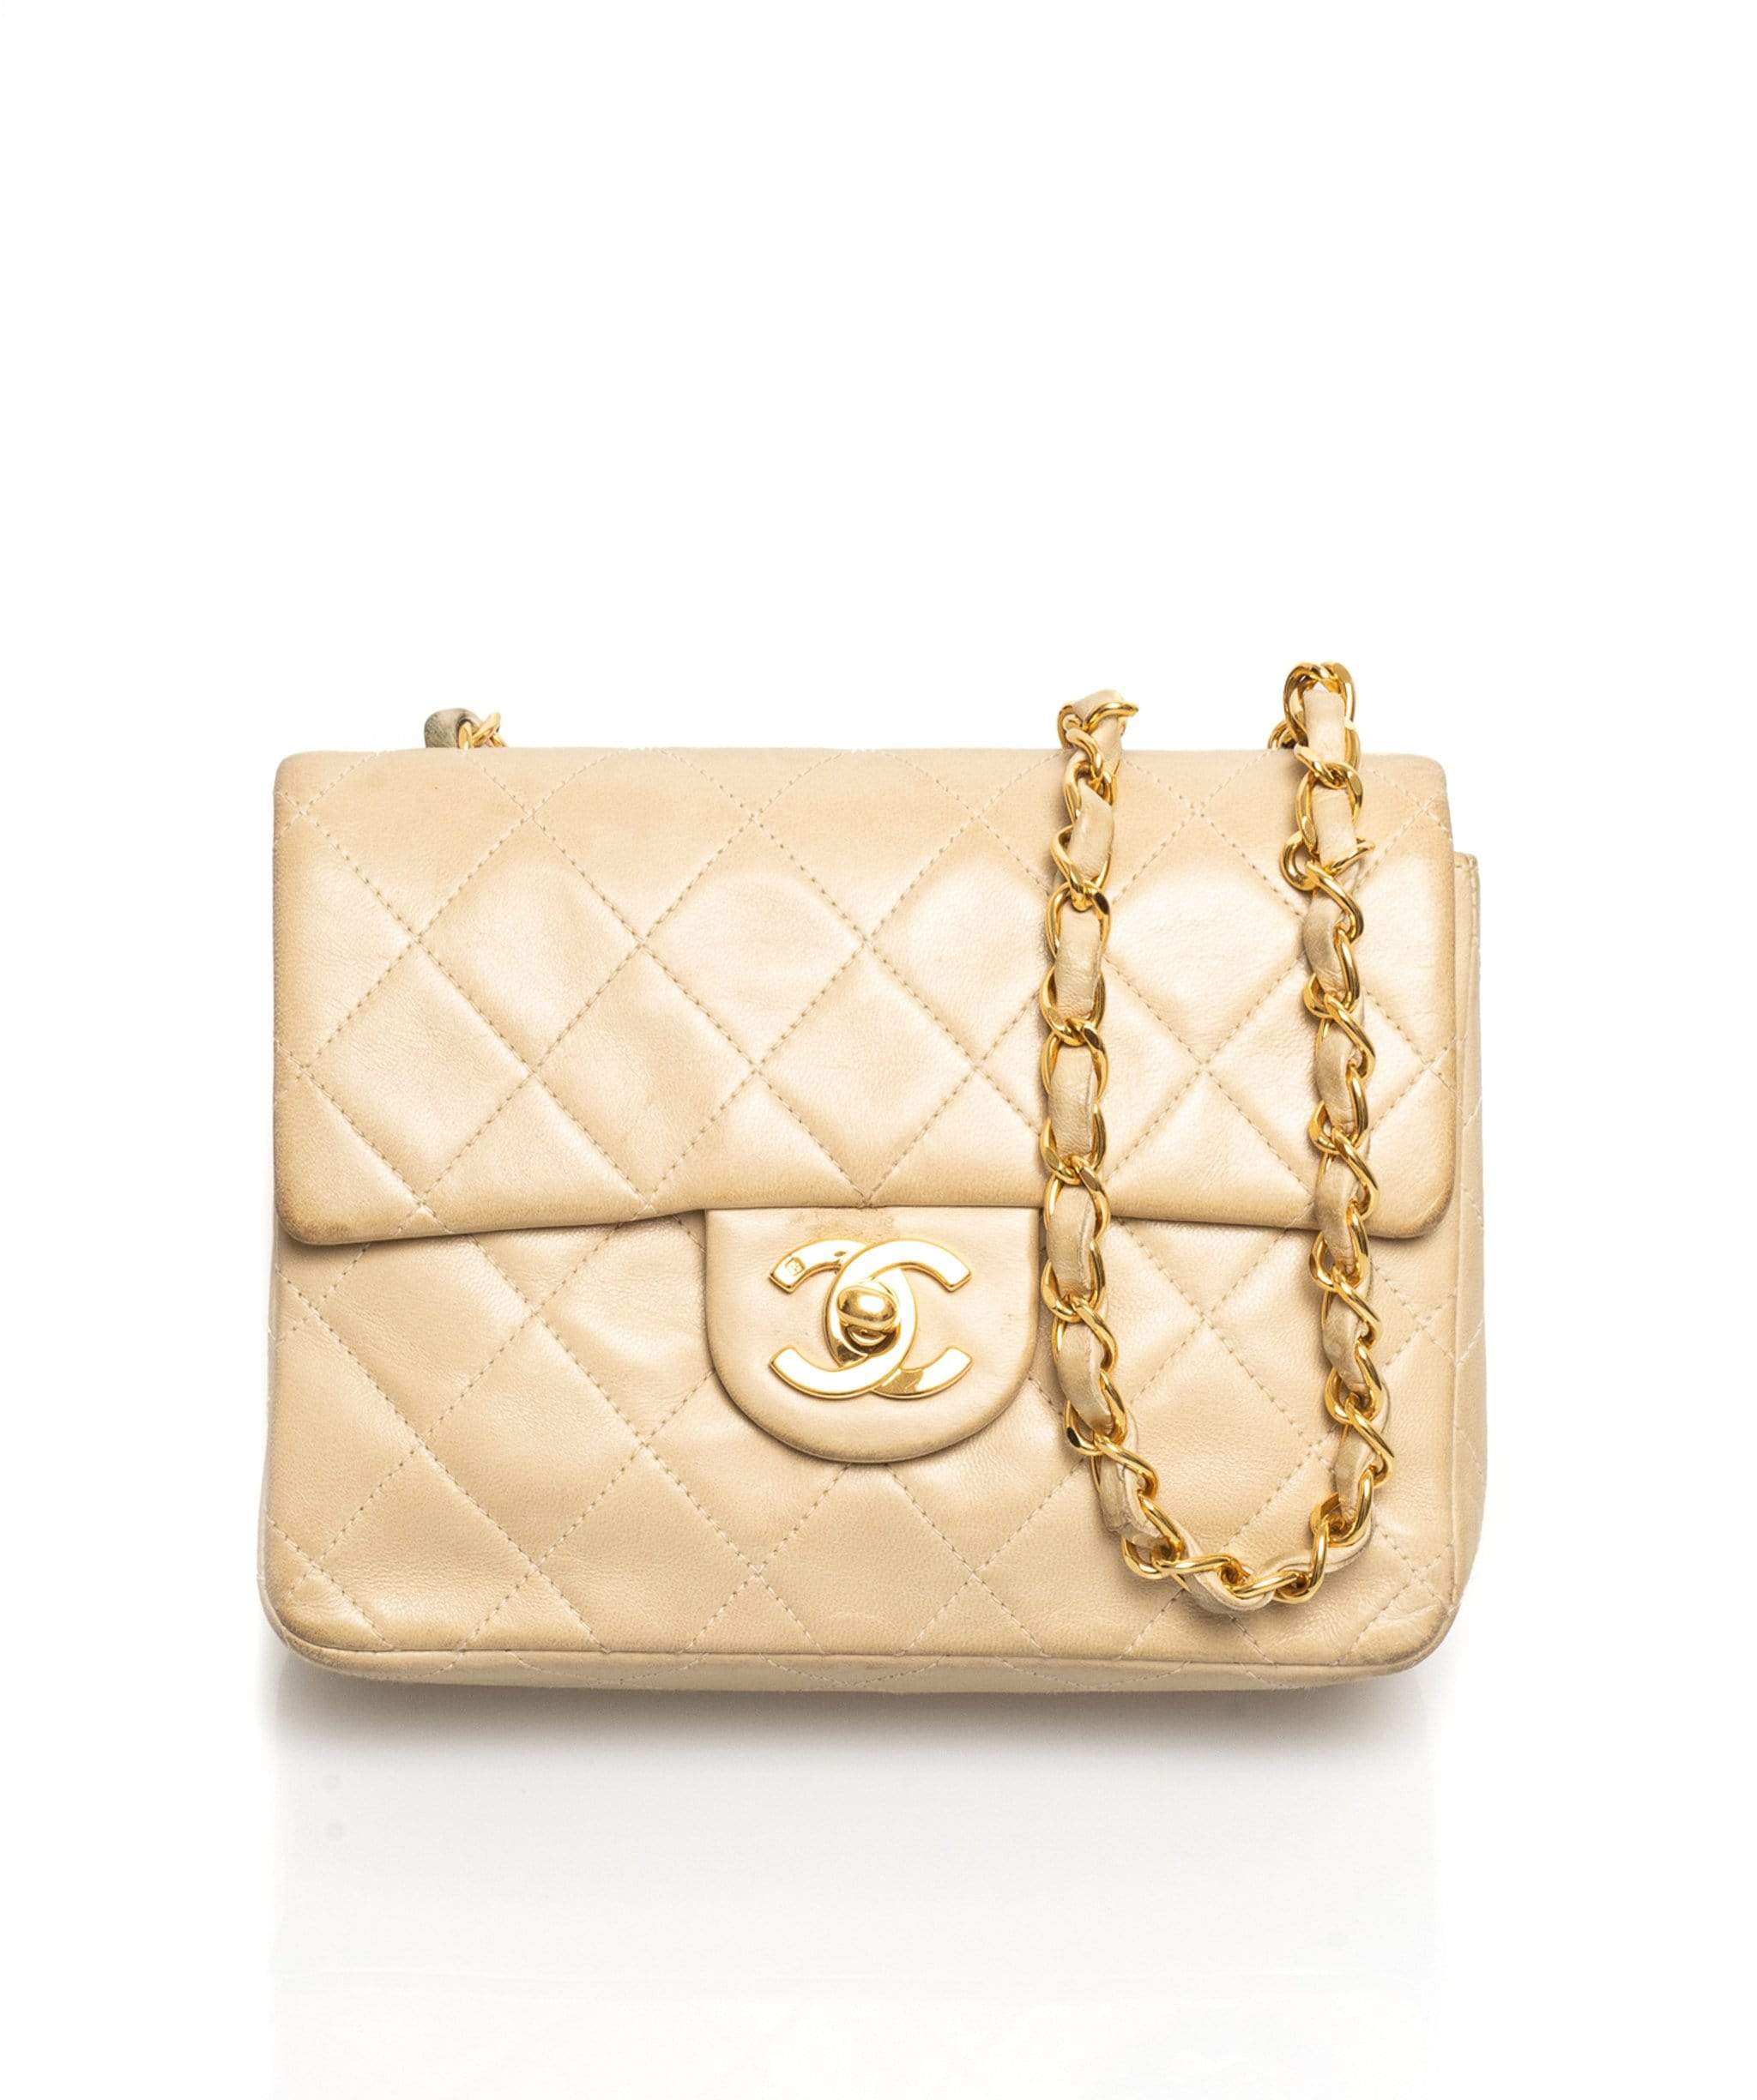 Chanel Grey Quilted Leather Mini Accordion Flap Bag